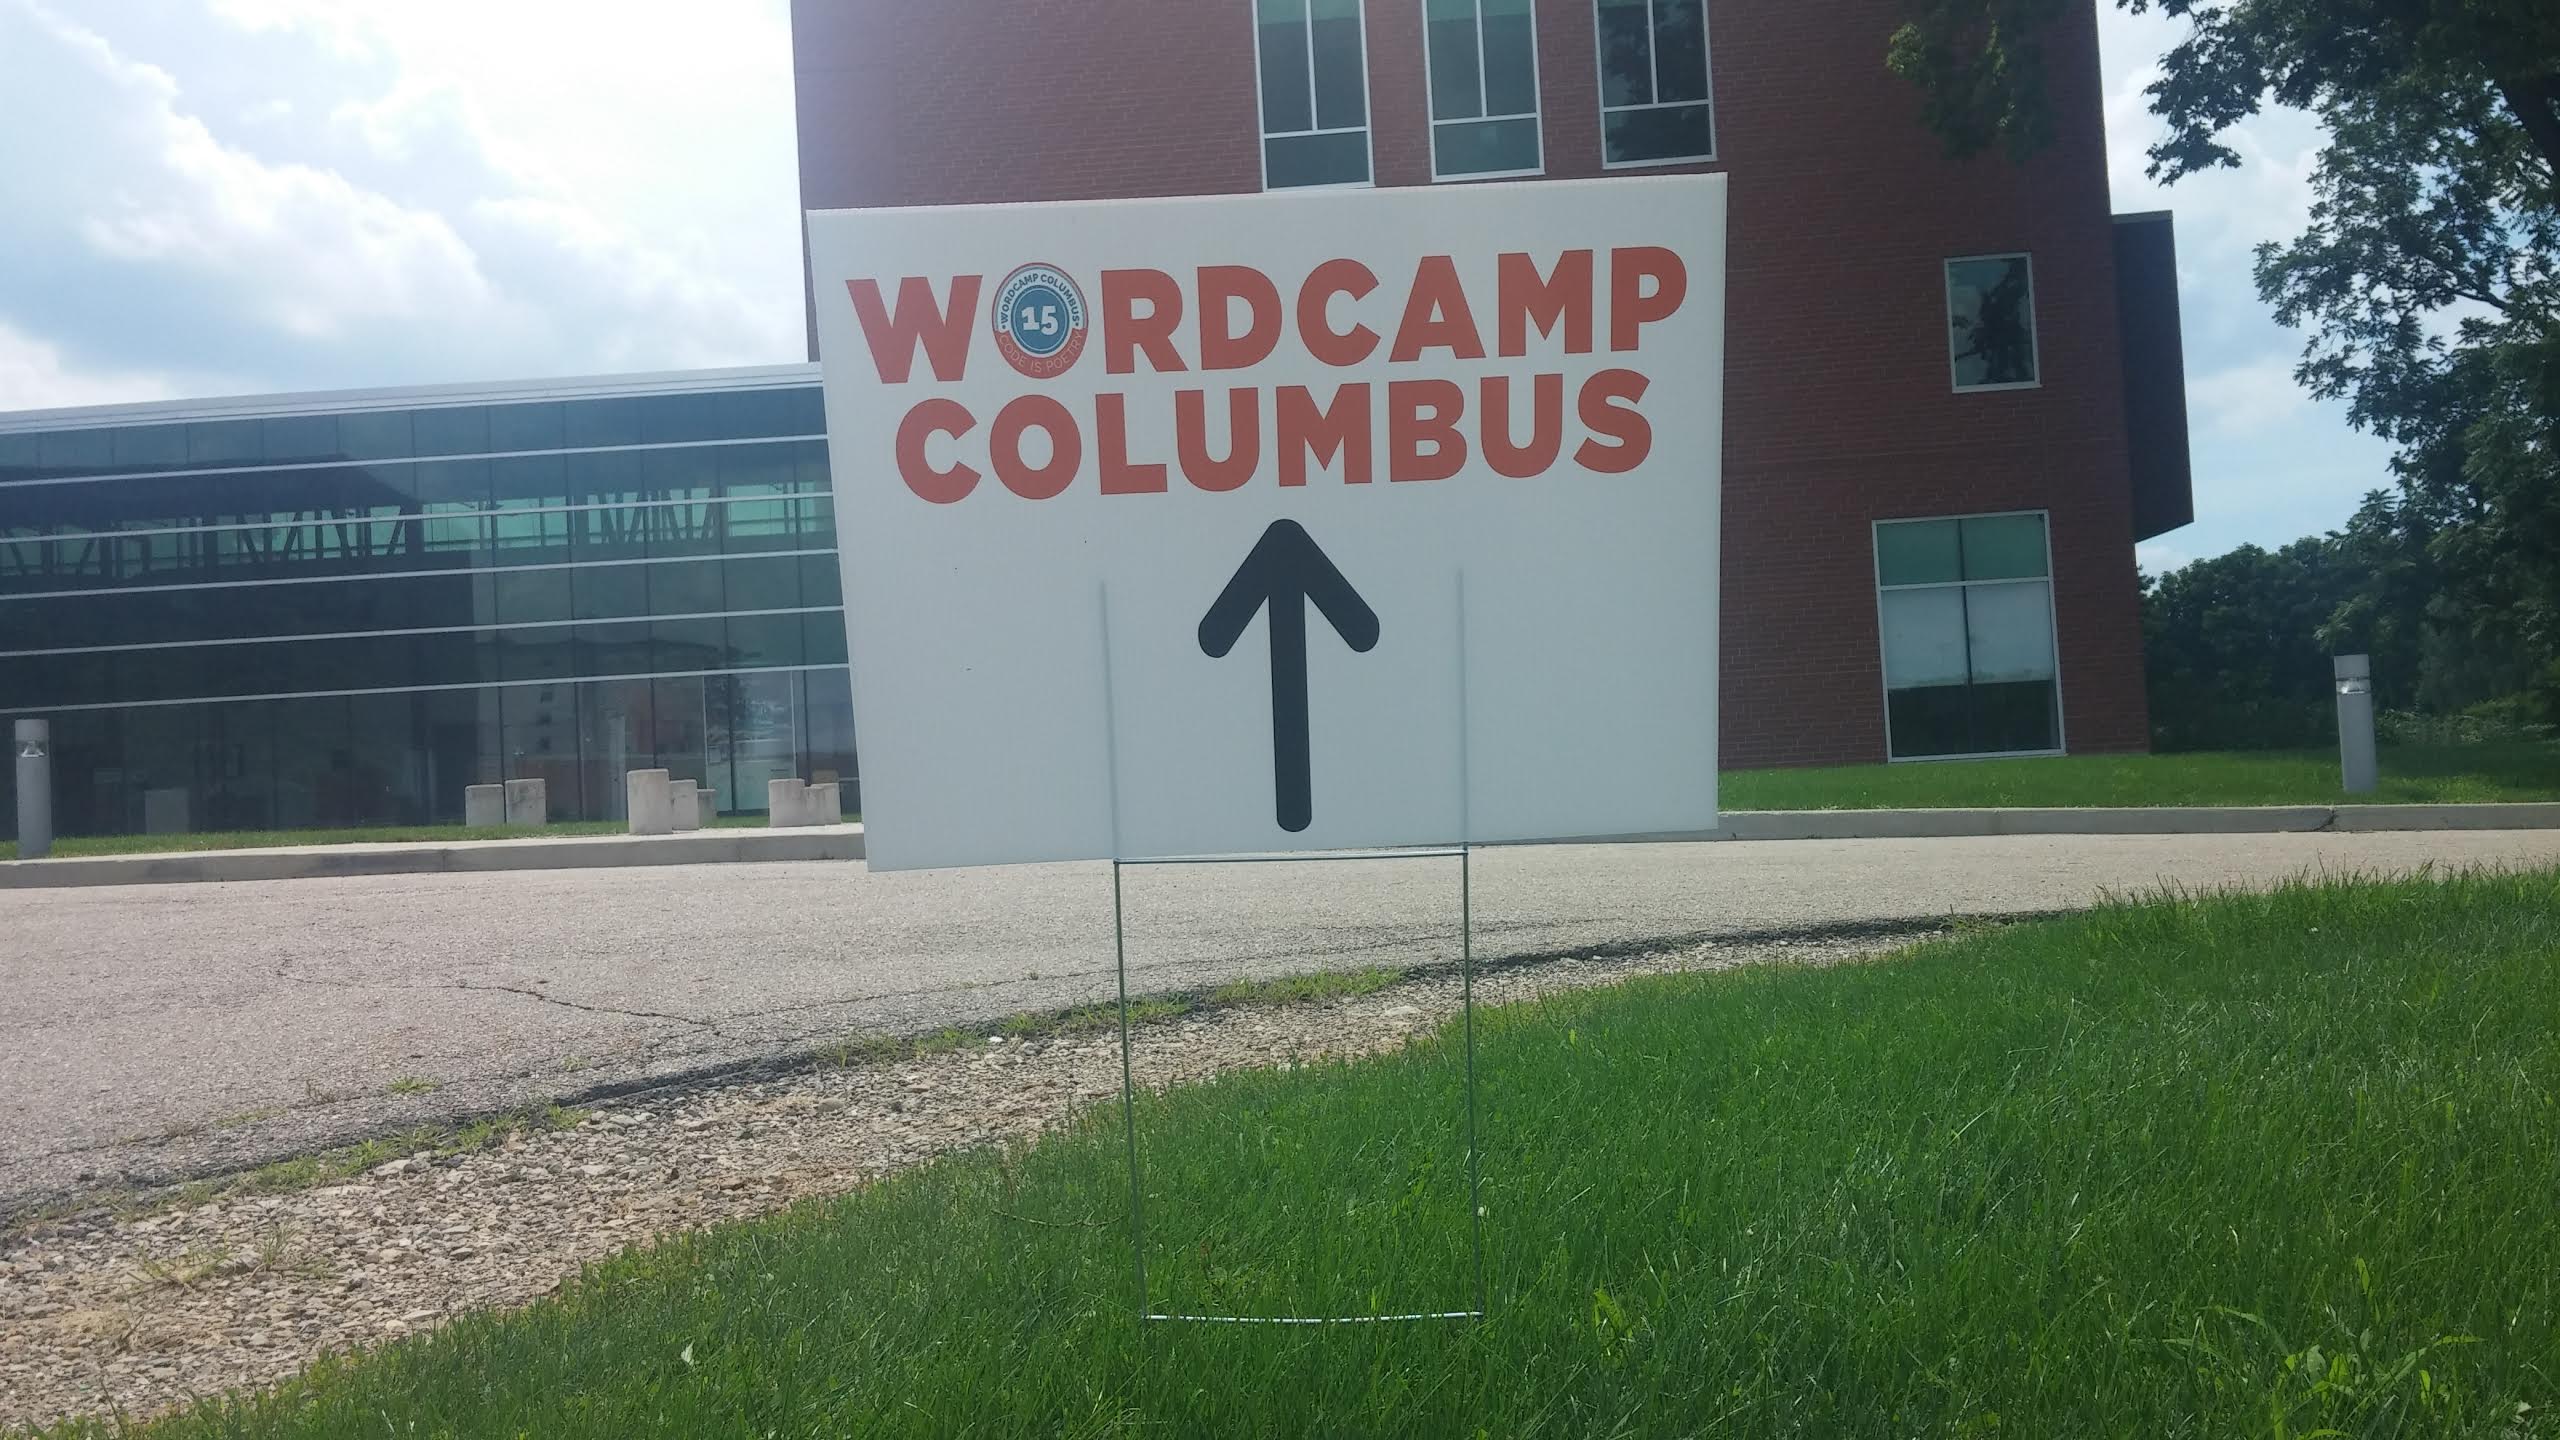 A directional sign pointing to the building where WordCamp Columbus 2015 takes place